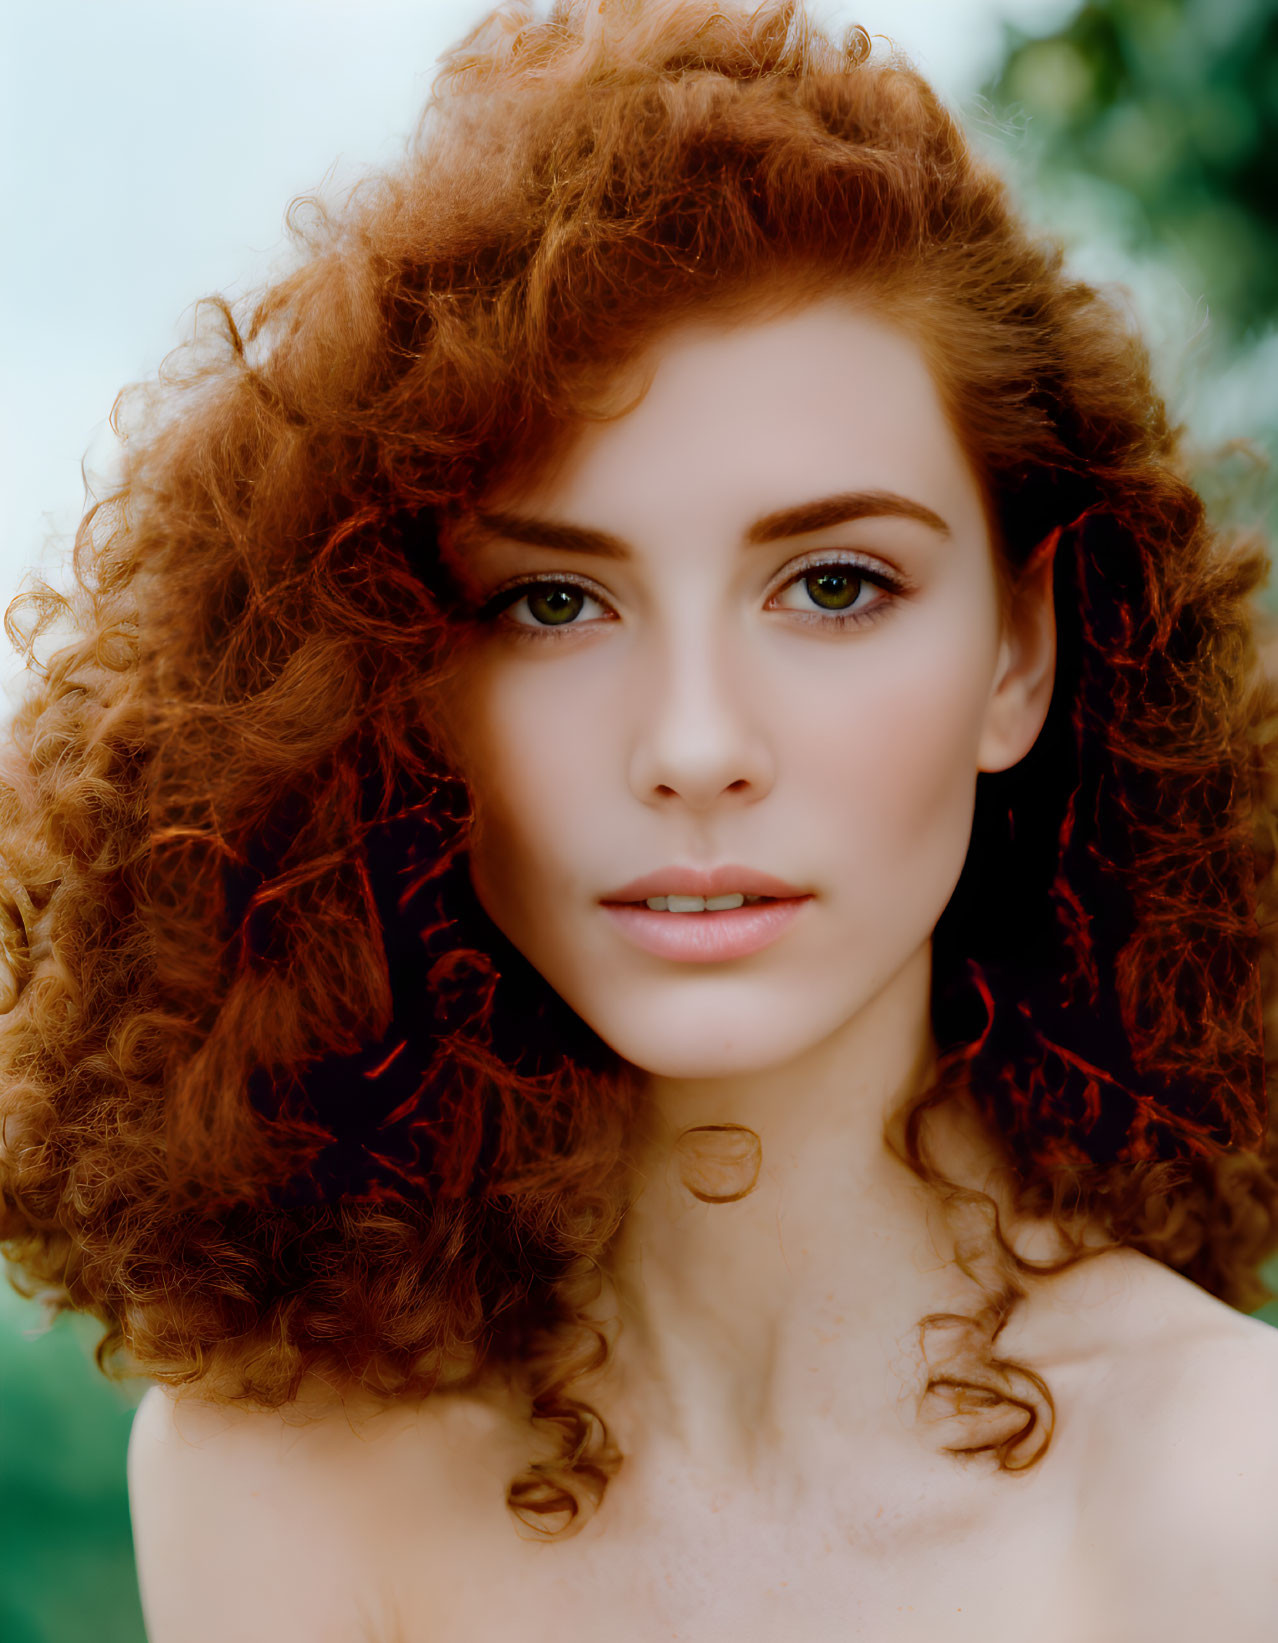 Portrait of Woman with Voluminous Curly Red Hair on Soft Green Background